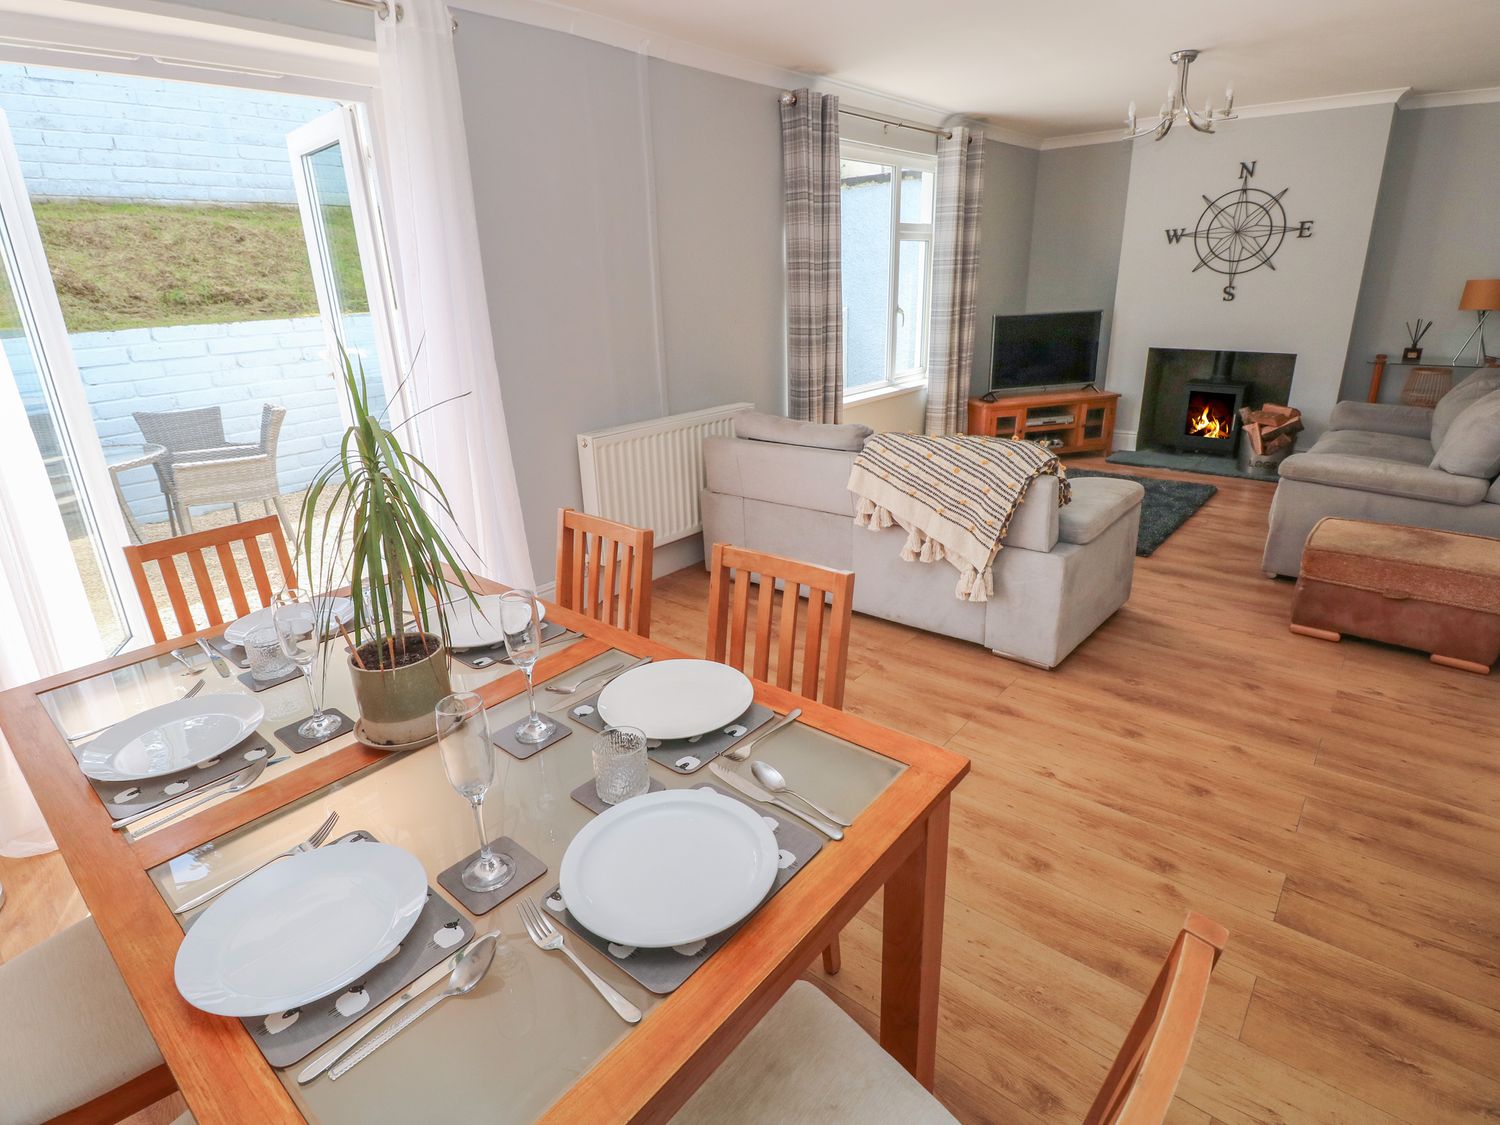 Afan House nr Pontrhydyfen, West Glamorgan. Three-bedroom home with woodburning stove. Pet-friendly.